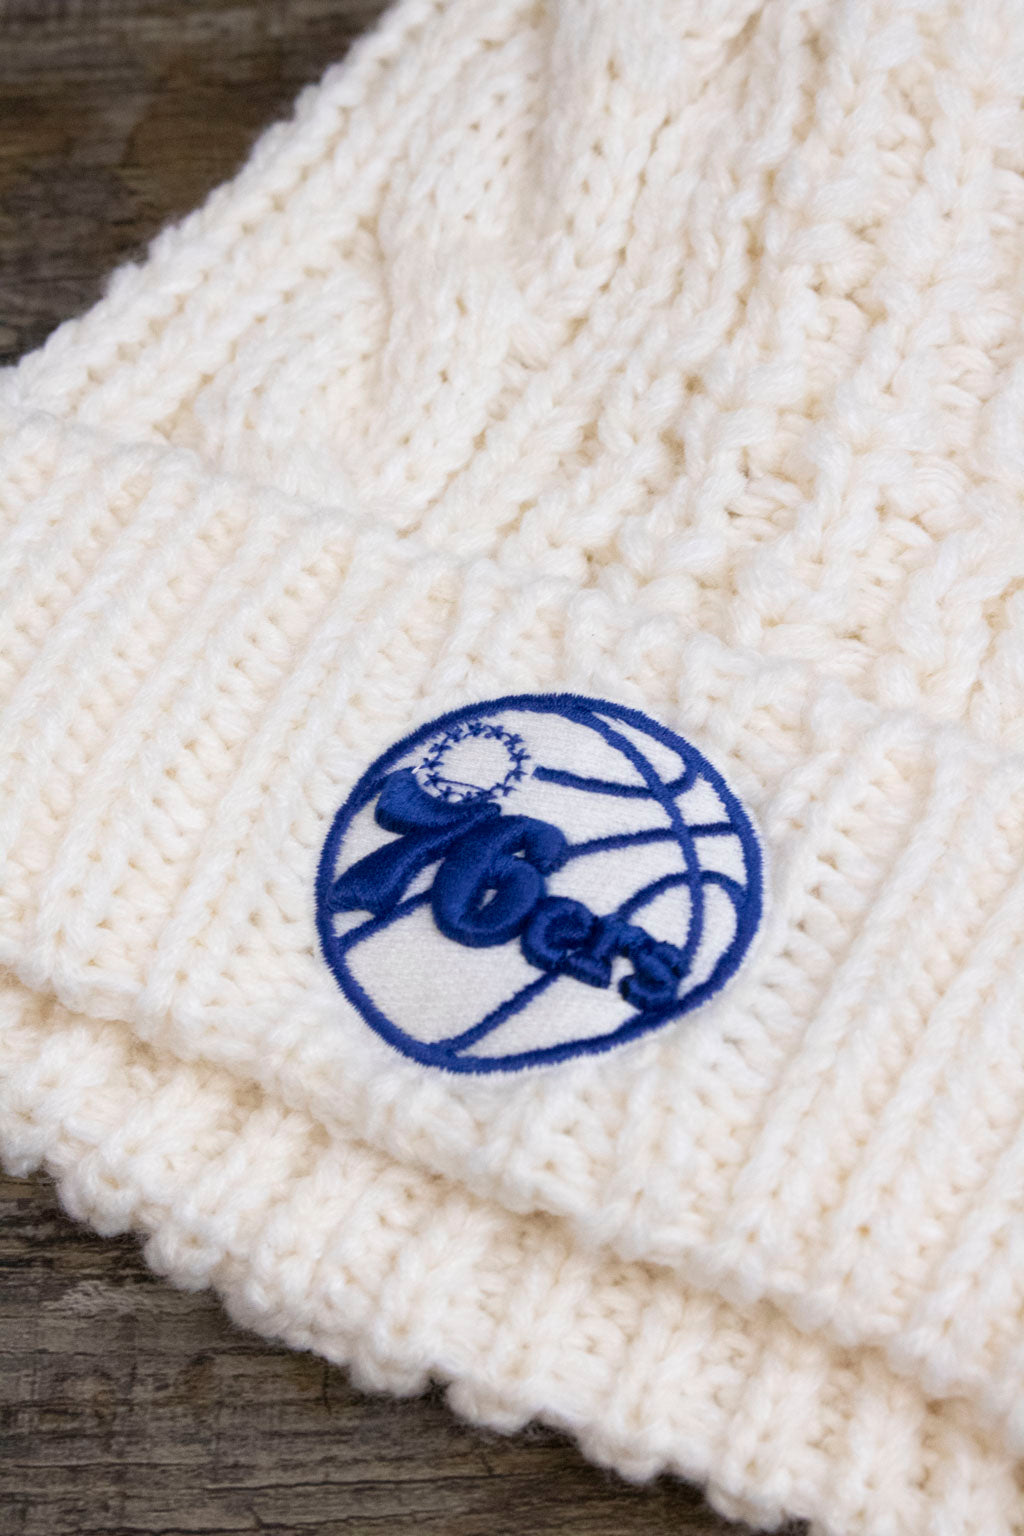 the logo on the Philadelphia 76ers Ladies Fur Pom Cream Winter Beanie | Sixers Meeko Faux Fox Fur White Pompom Beanie is made of blue and white embroidery